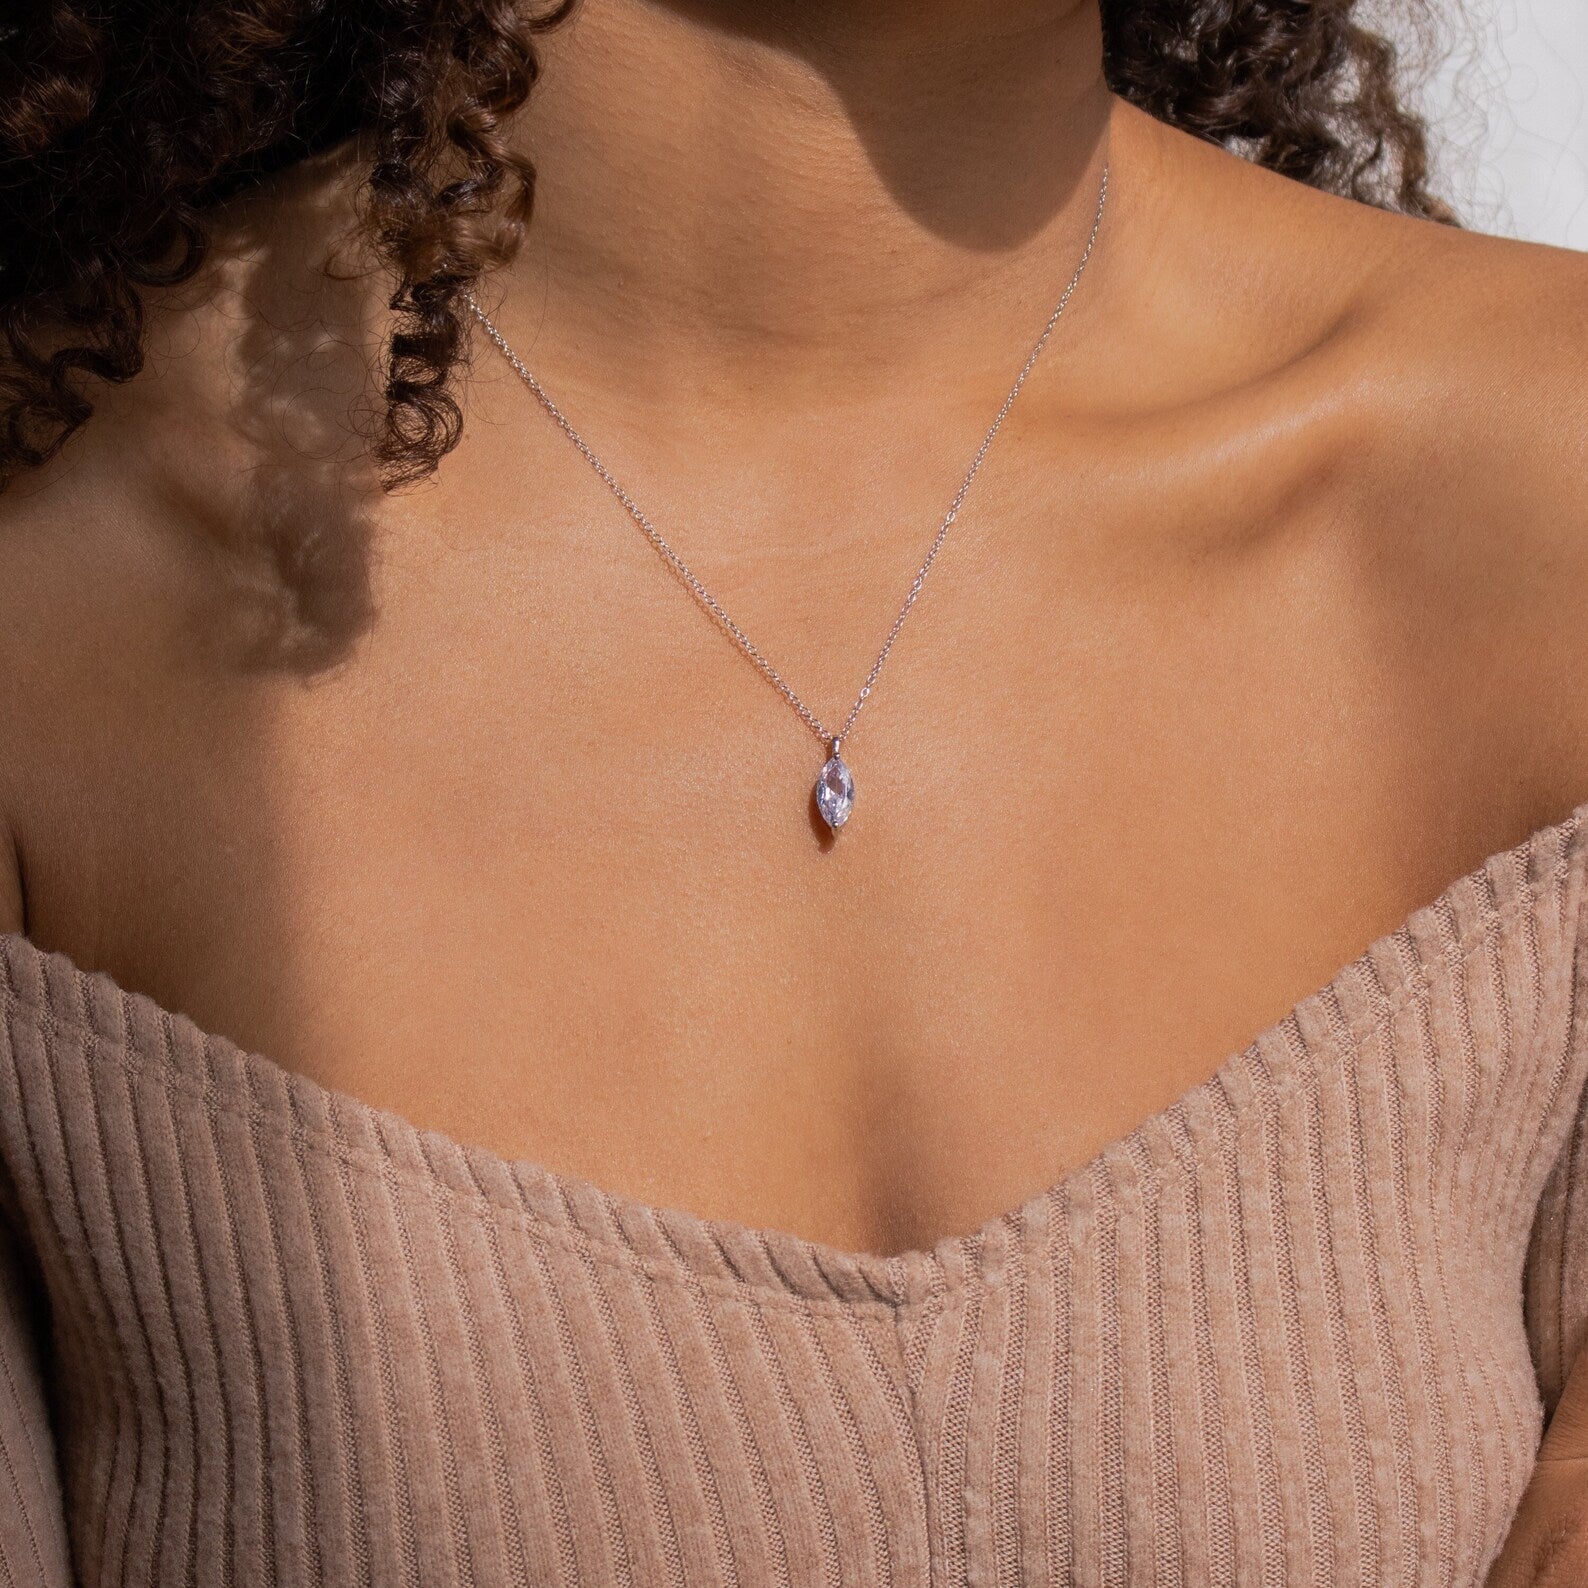 Diamond Solitaire Necklace / CZ Solitaire Pendant / Dainty Solitaire  Necklace / Minimalist Necklace / Solitaire Prong Necklace / Bridal - Etsy |  Floating diamond necklace, Minimalist diamond necklace, Bridal diamond  necklace